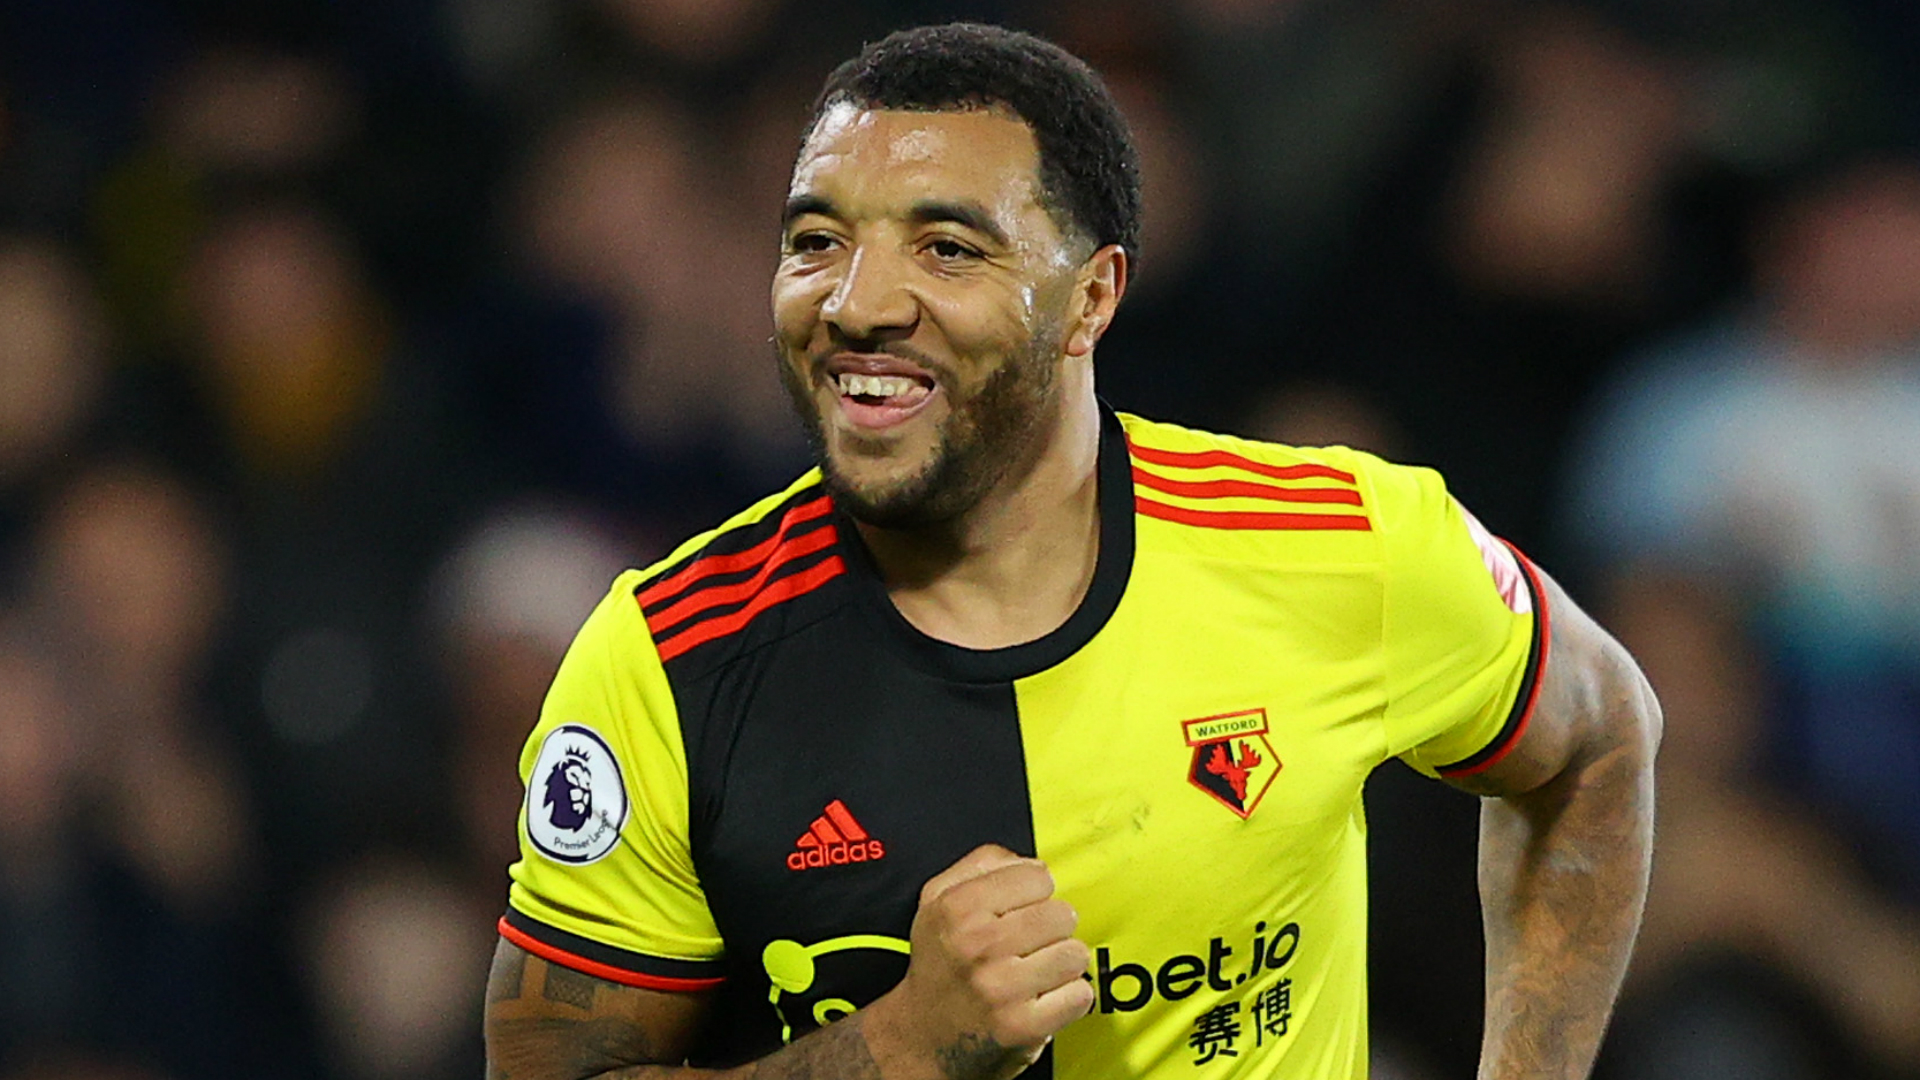 Watford captain Troy Deeney has had some of his concerns over coronavirus answered and is set to join his team-mates at training next week.